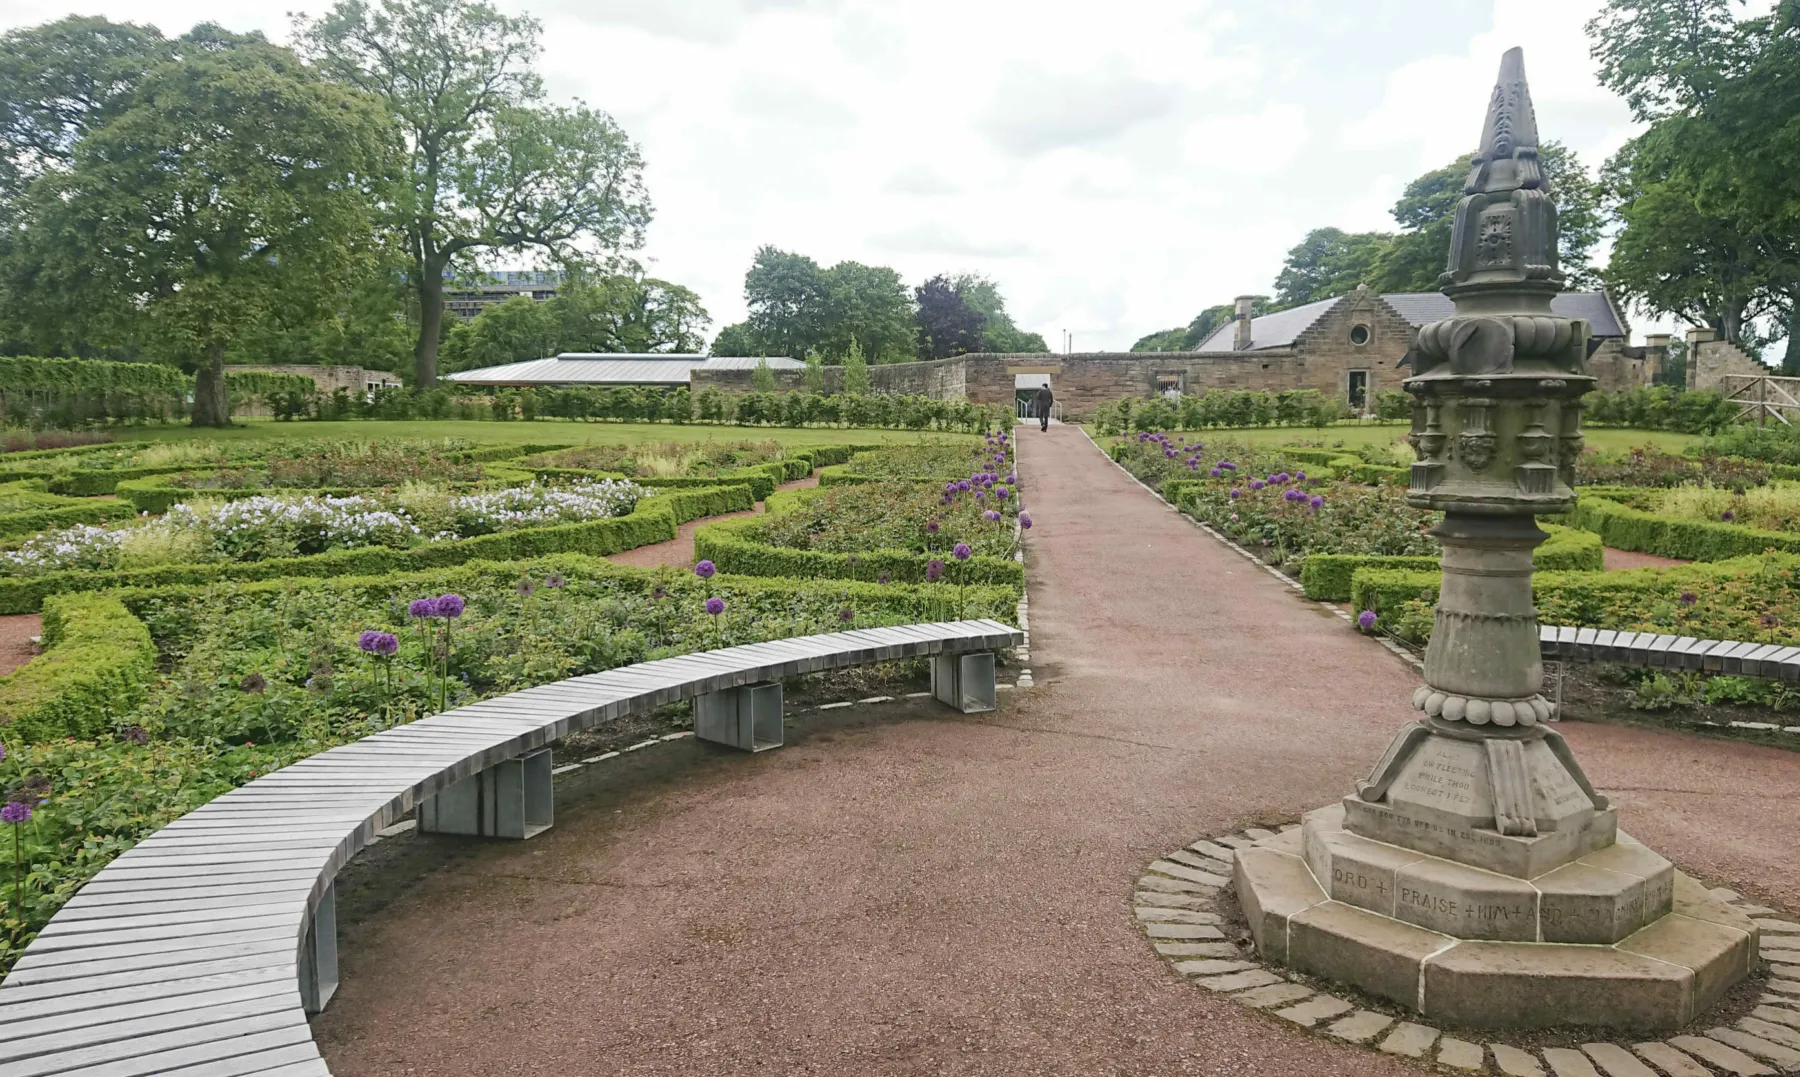 Saughton Park and Gardens, Edinburgh. In the formal garden a historic sandstone sundial is surrounded by  a ring of low wooden benches and flower beds edged with box hedging. In the distance the buildings of Saughton Park - cafe and visitor centre.